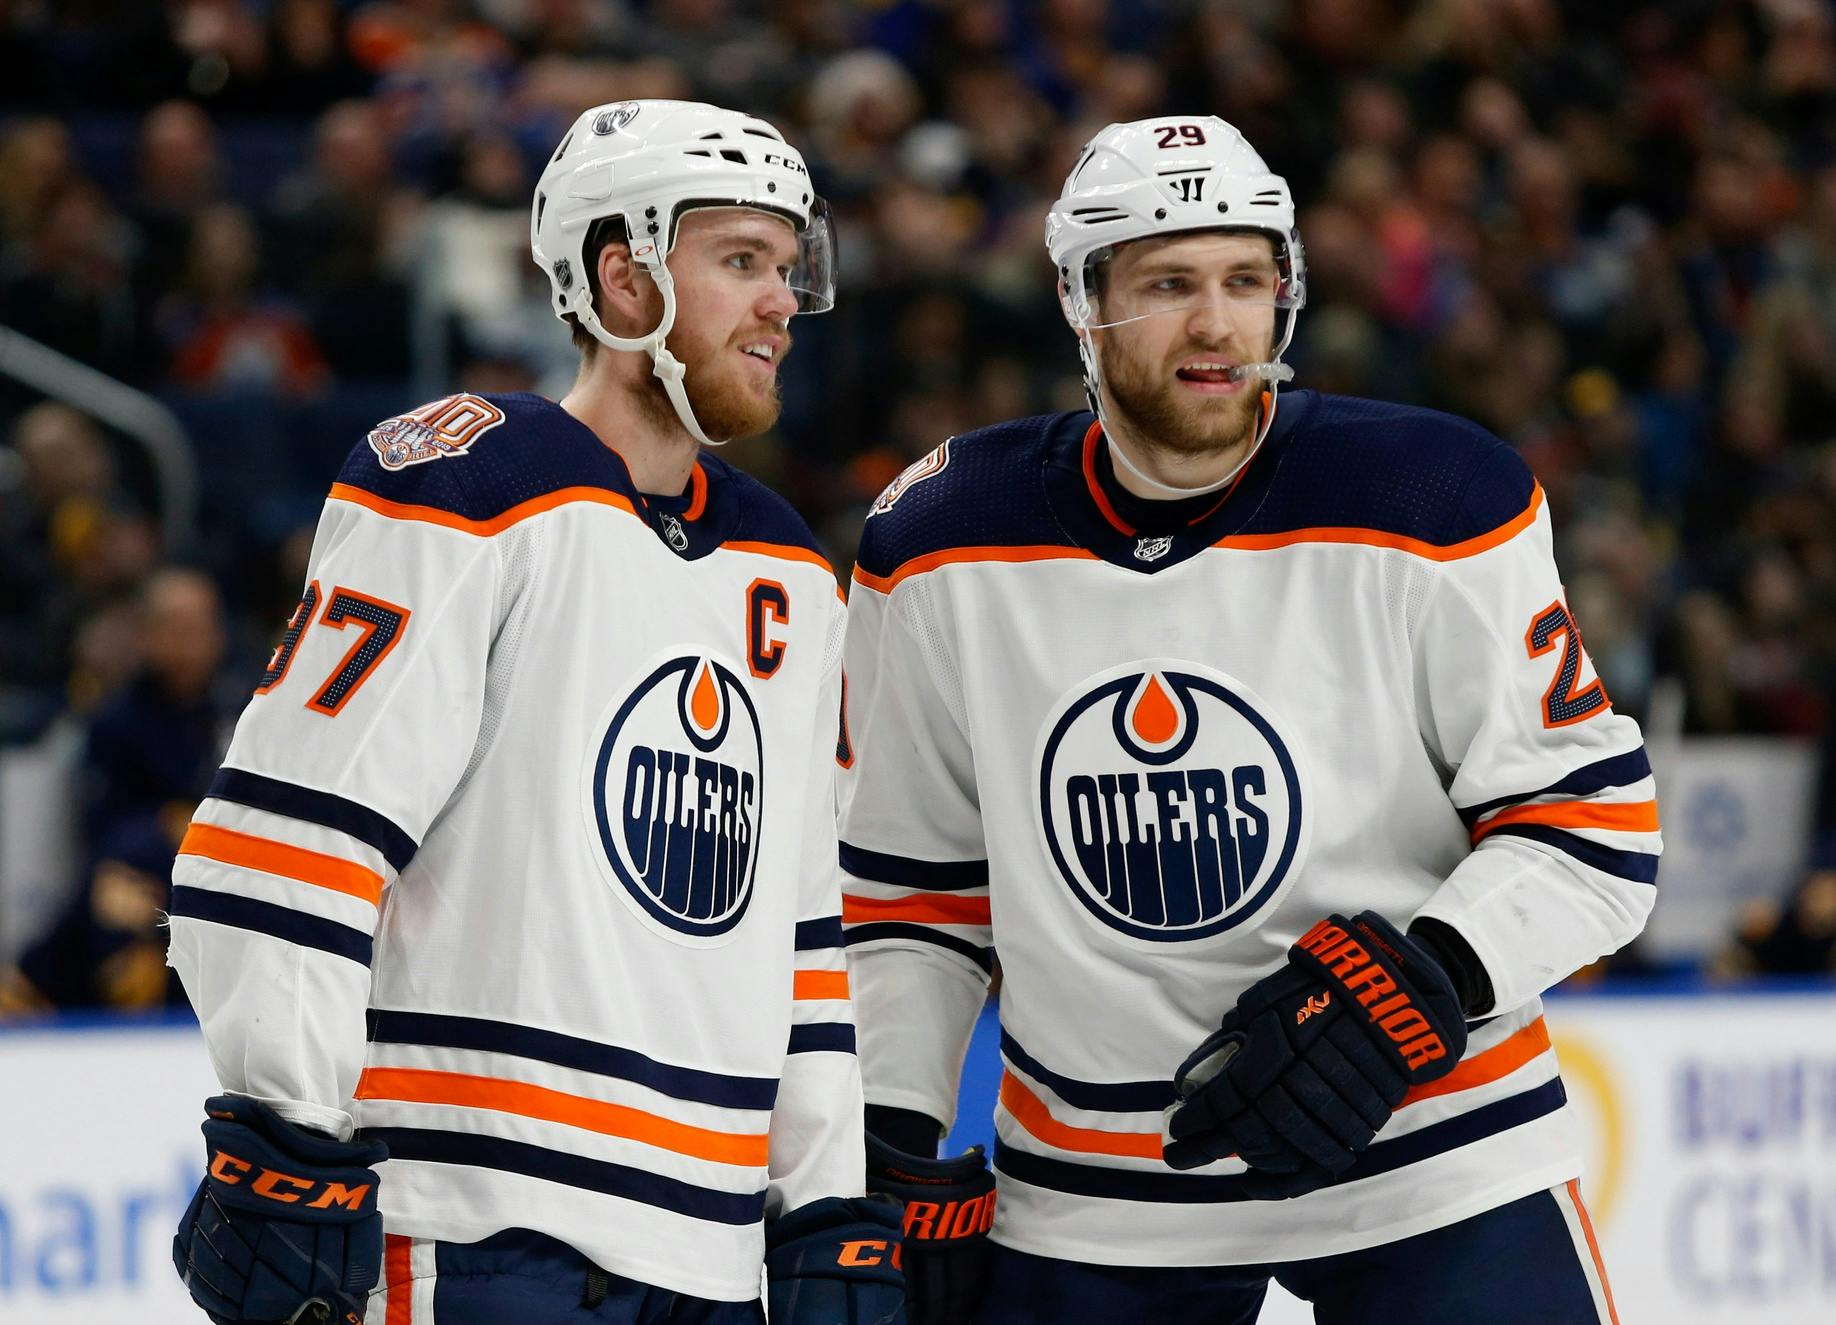 Sportsnet Stats on X: Connor McDavid - 4 points shy of 800 Leon Draisaitl  - 4 points shy of 700 Ryan Nugent-Hopkins - 6 points shy of 600  #LetsGoOilers  / X